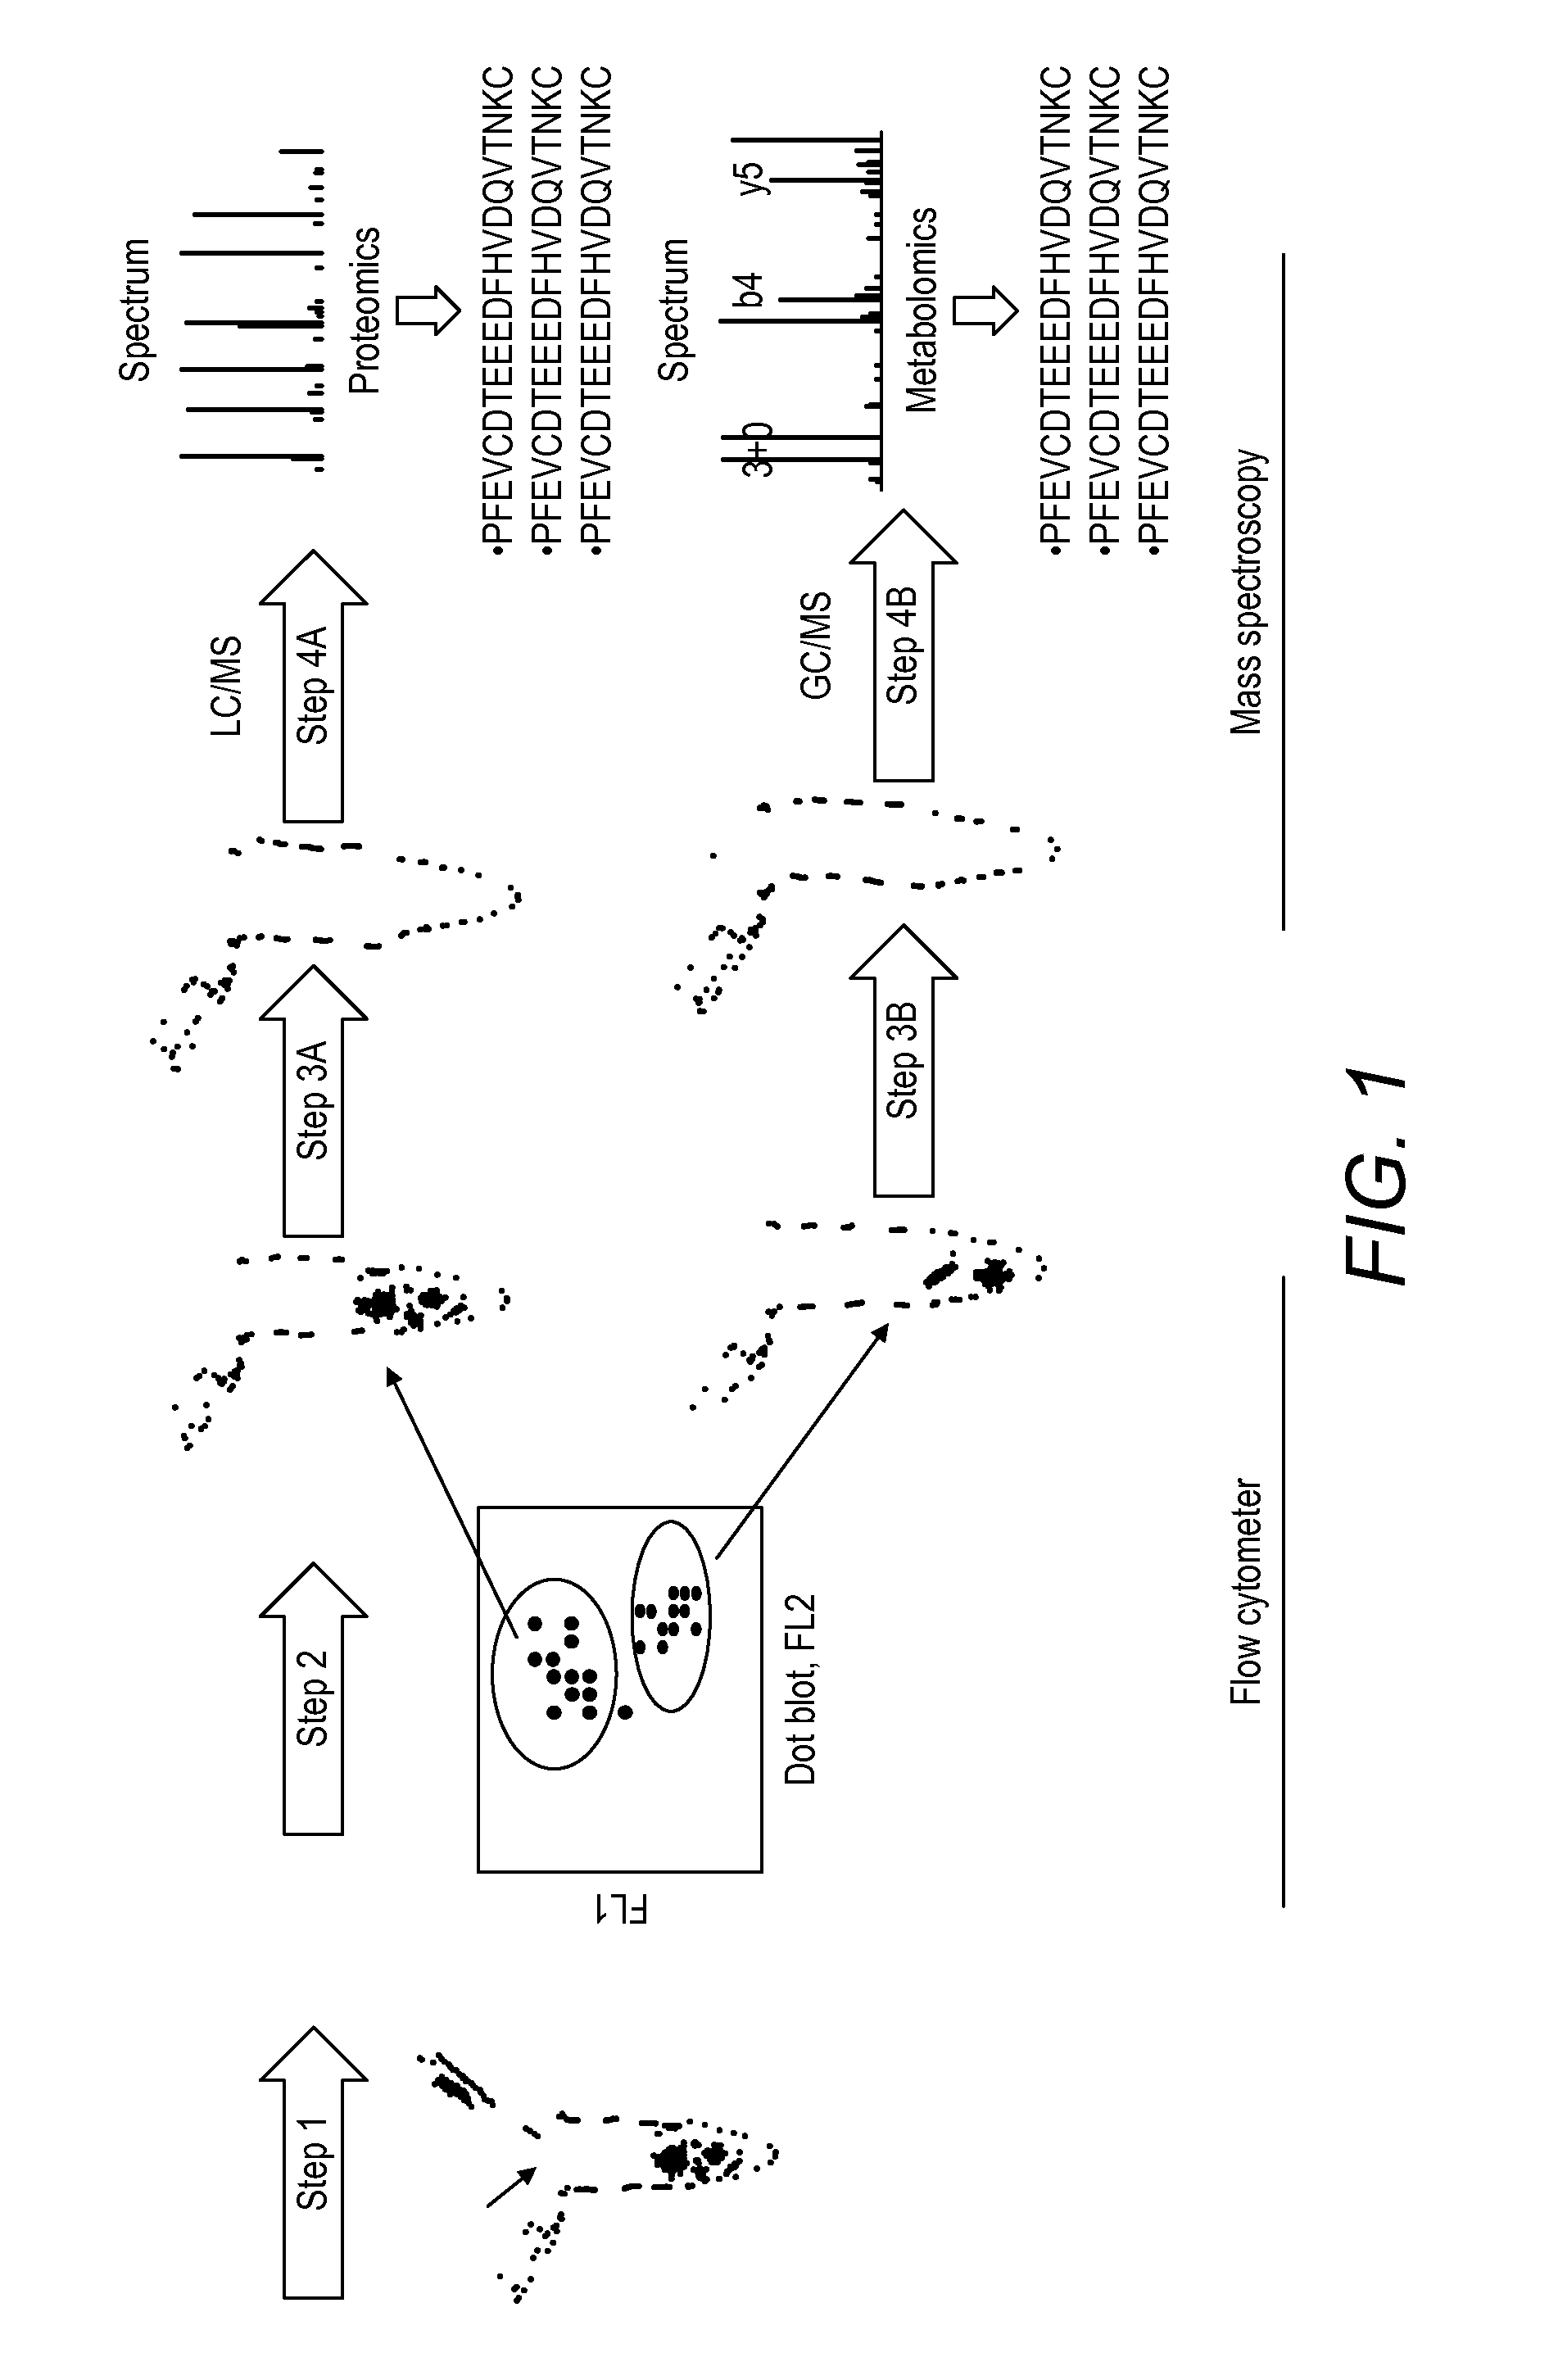 Method, composition, isolation and identification of a plaque particle and related biomarker